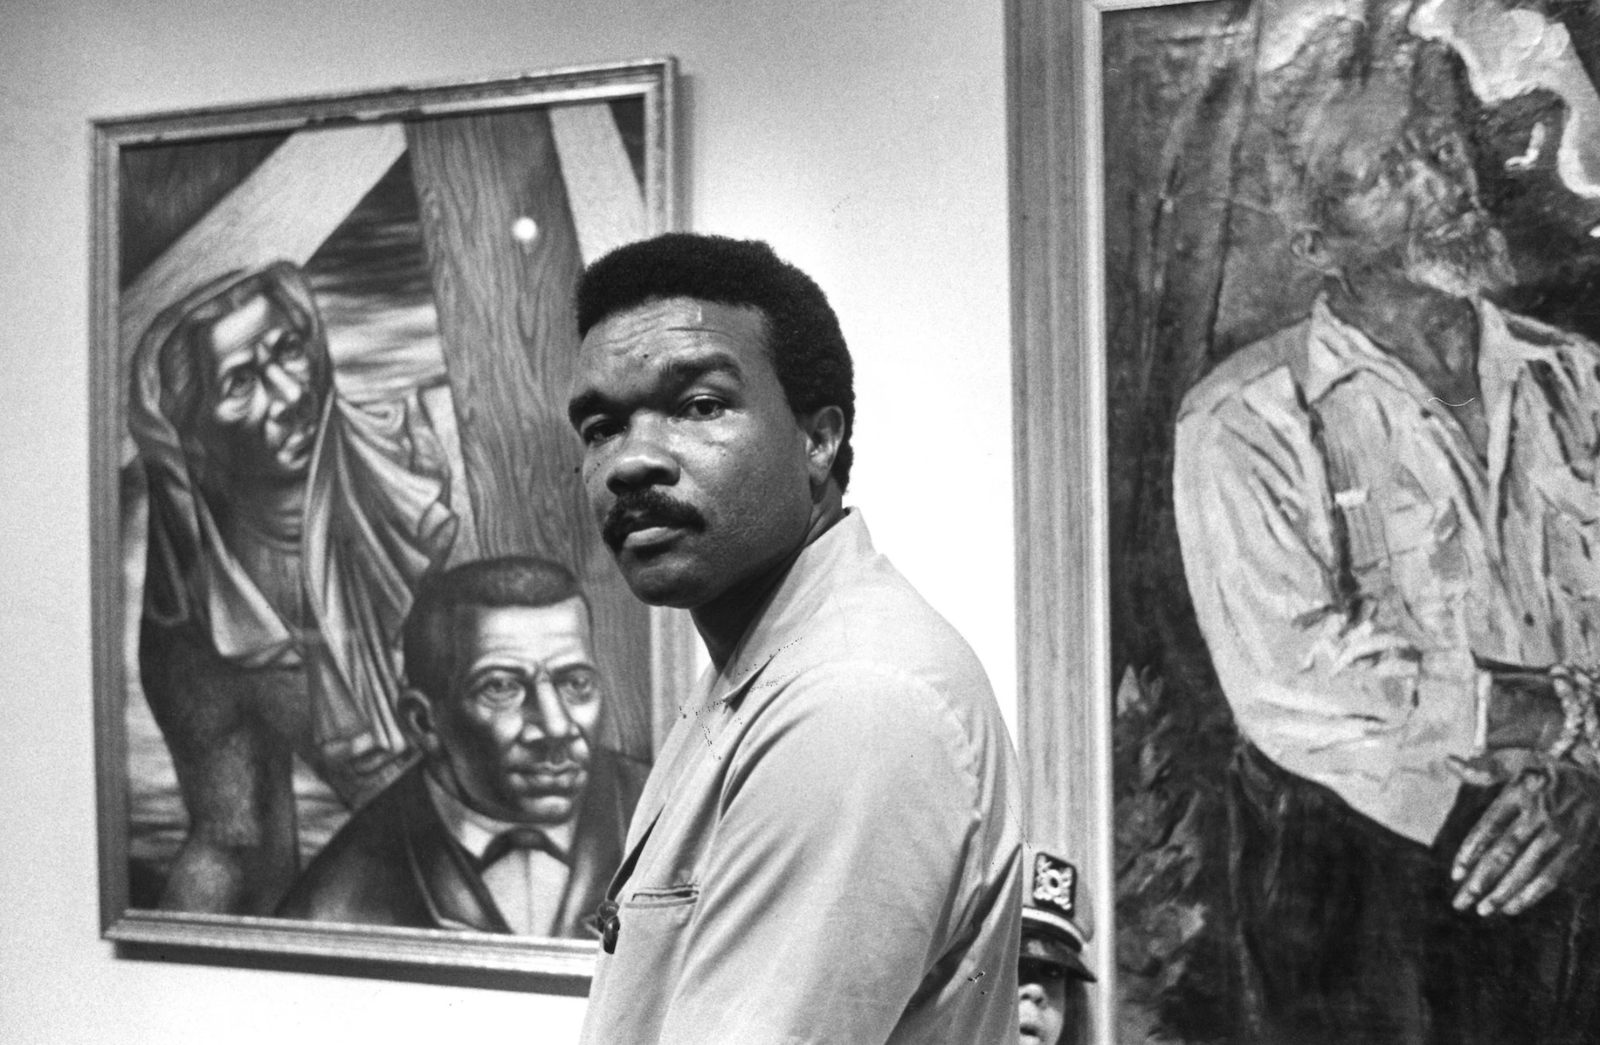 image of David Driskell with "Two Centuries of Black American Art" exhibition